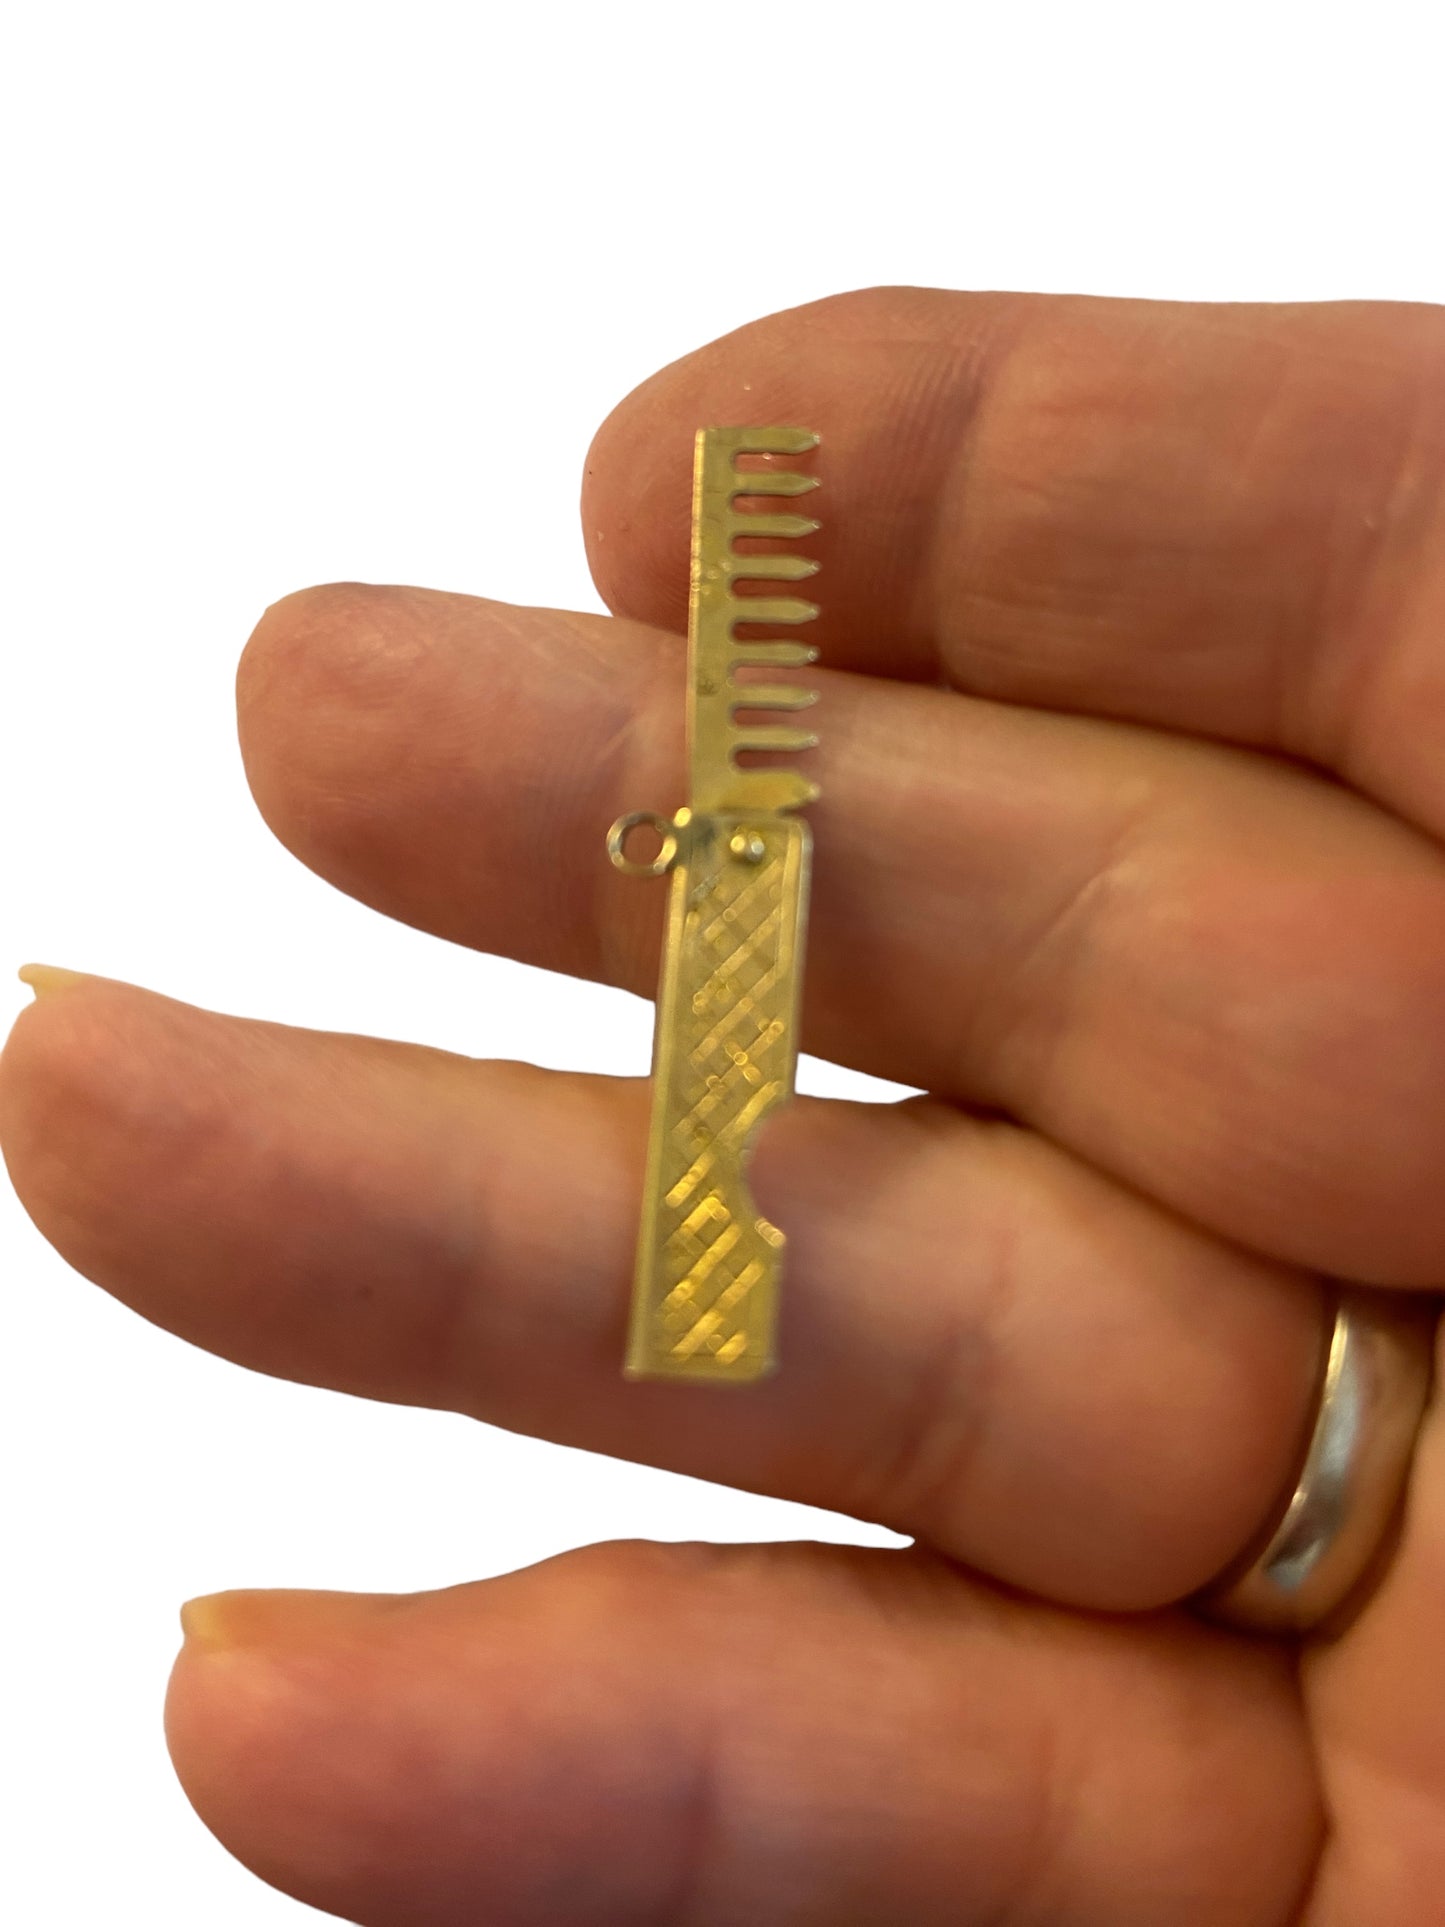 9ct vintage opening comb charm